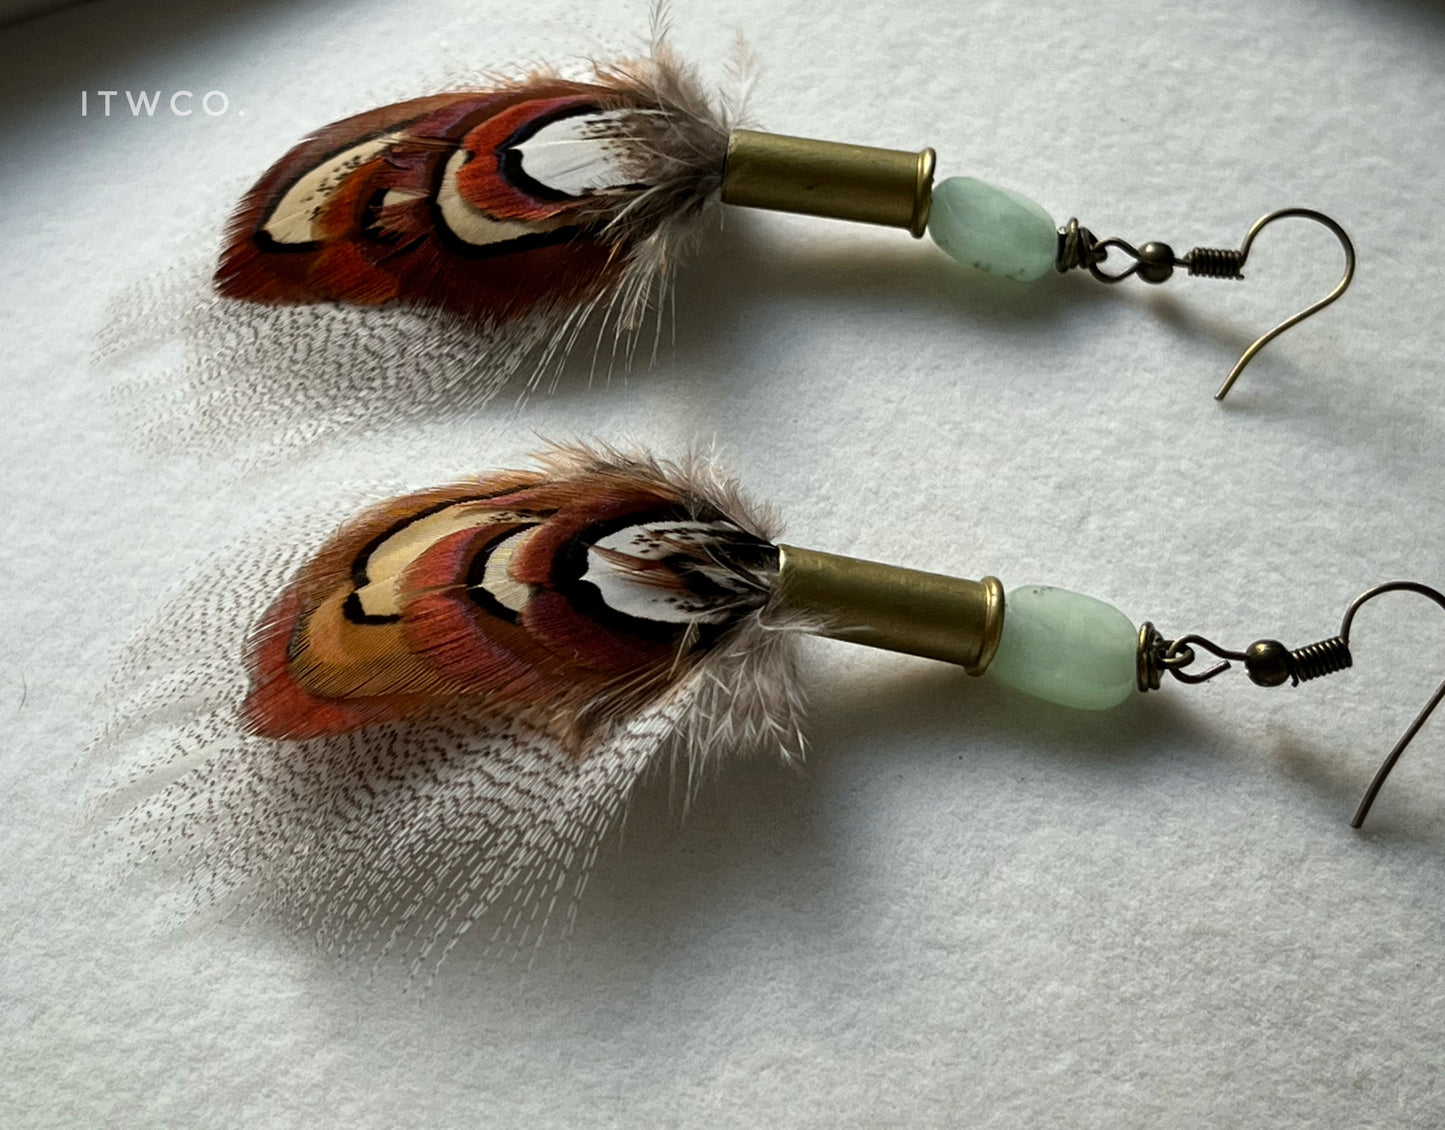 Feather + Recycled .22 Cartridge Earrings